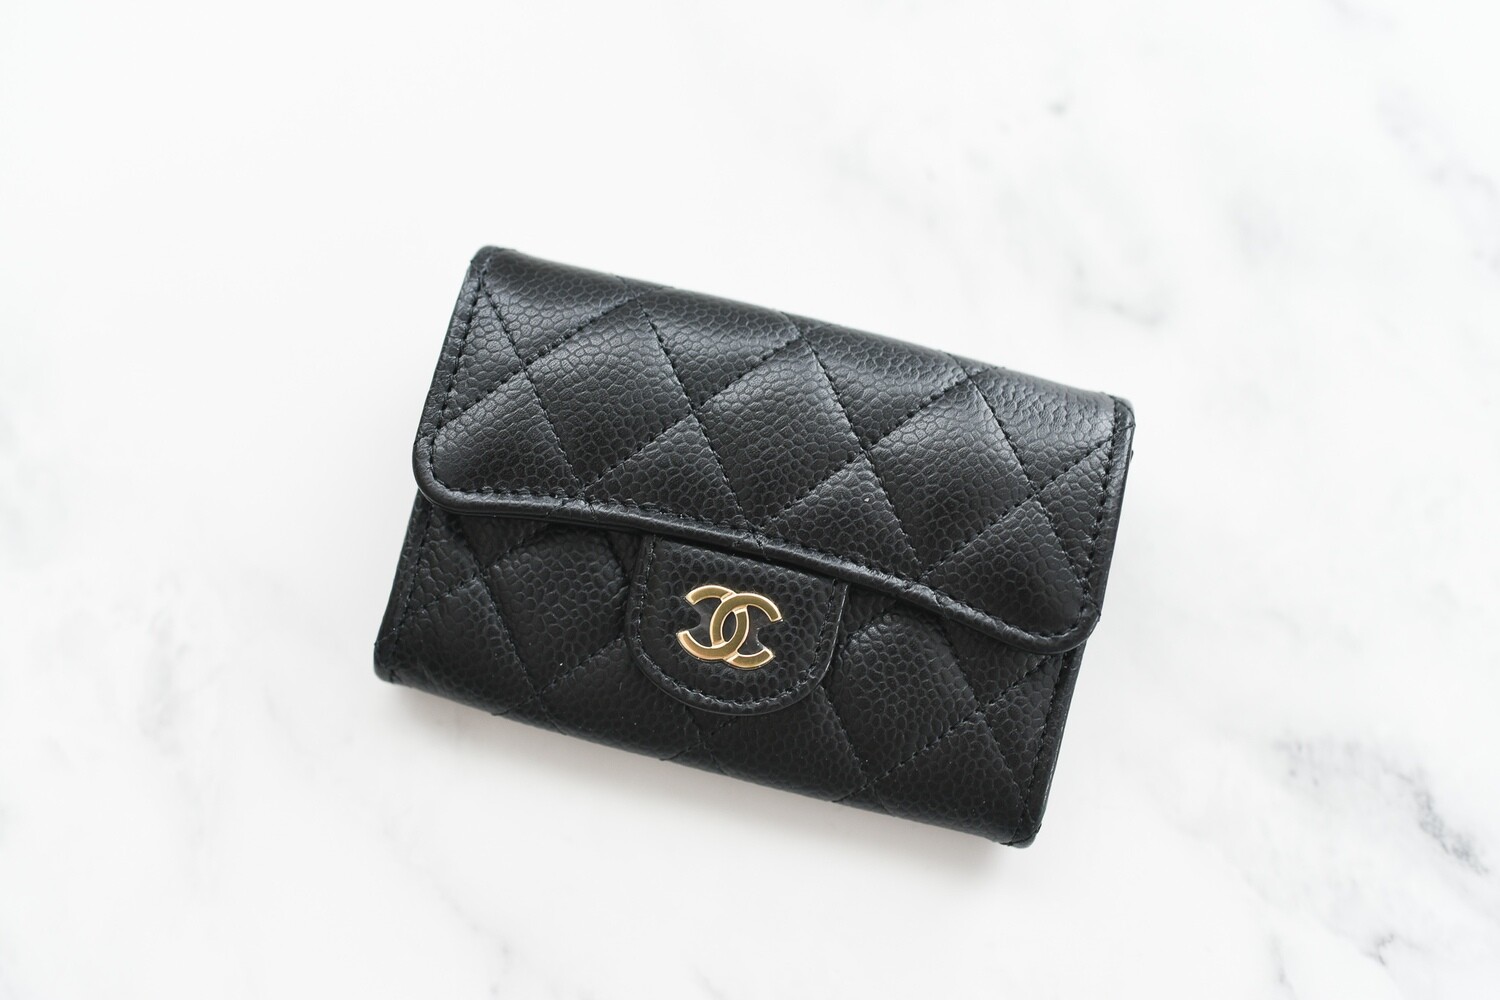 Chanel SLG Snap Card Holder, Black Caviar Leather with Gold Hardware, New  in Box GA001